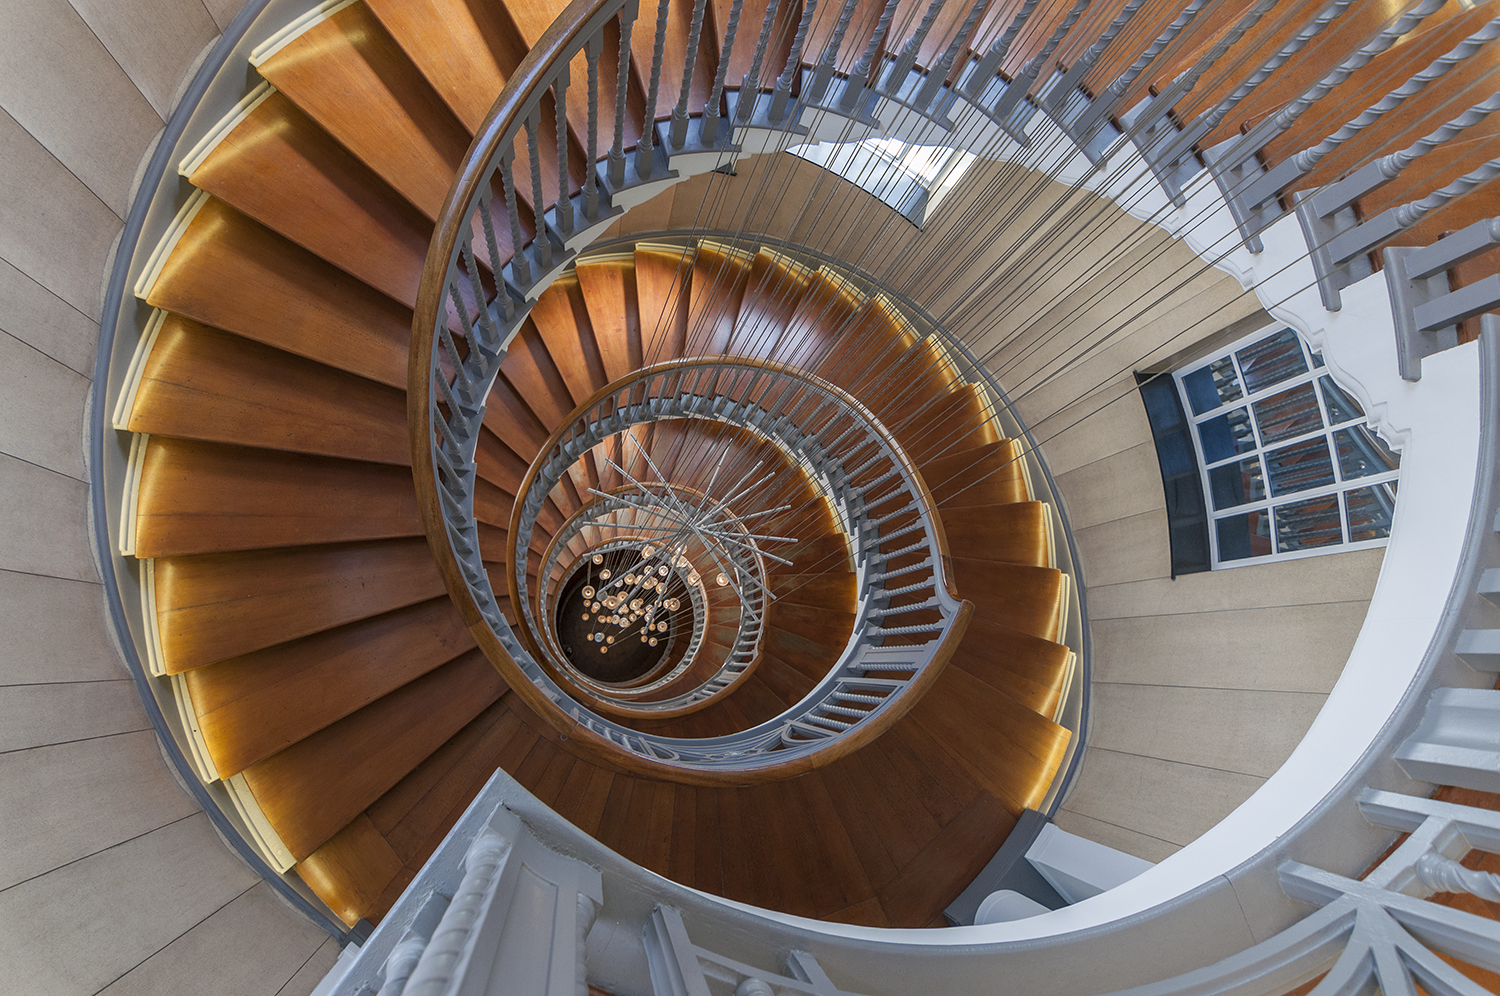 Spiral staircase shot from above (London)